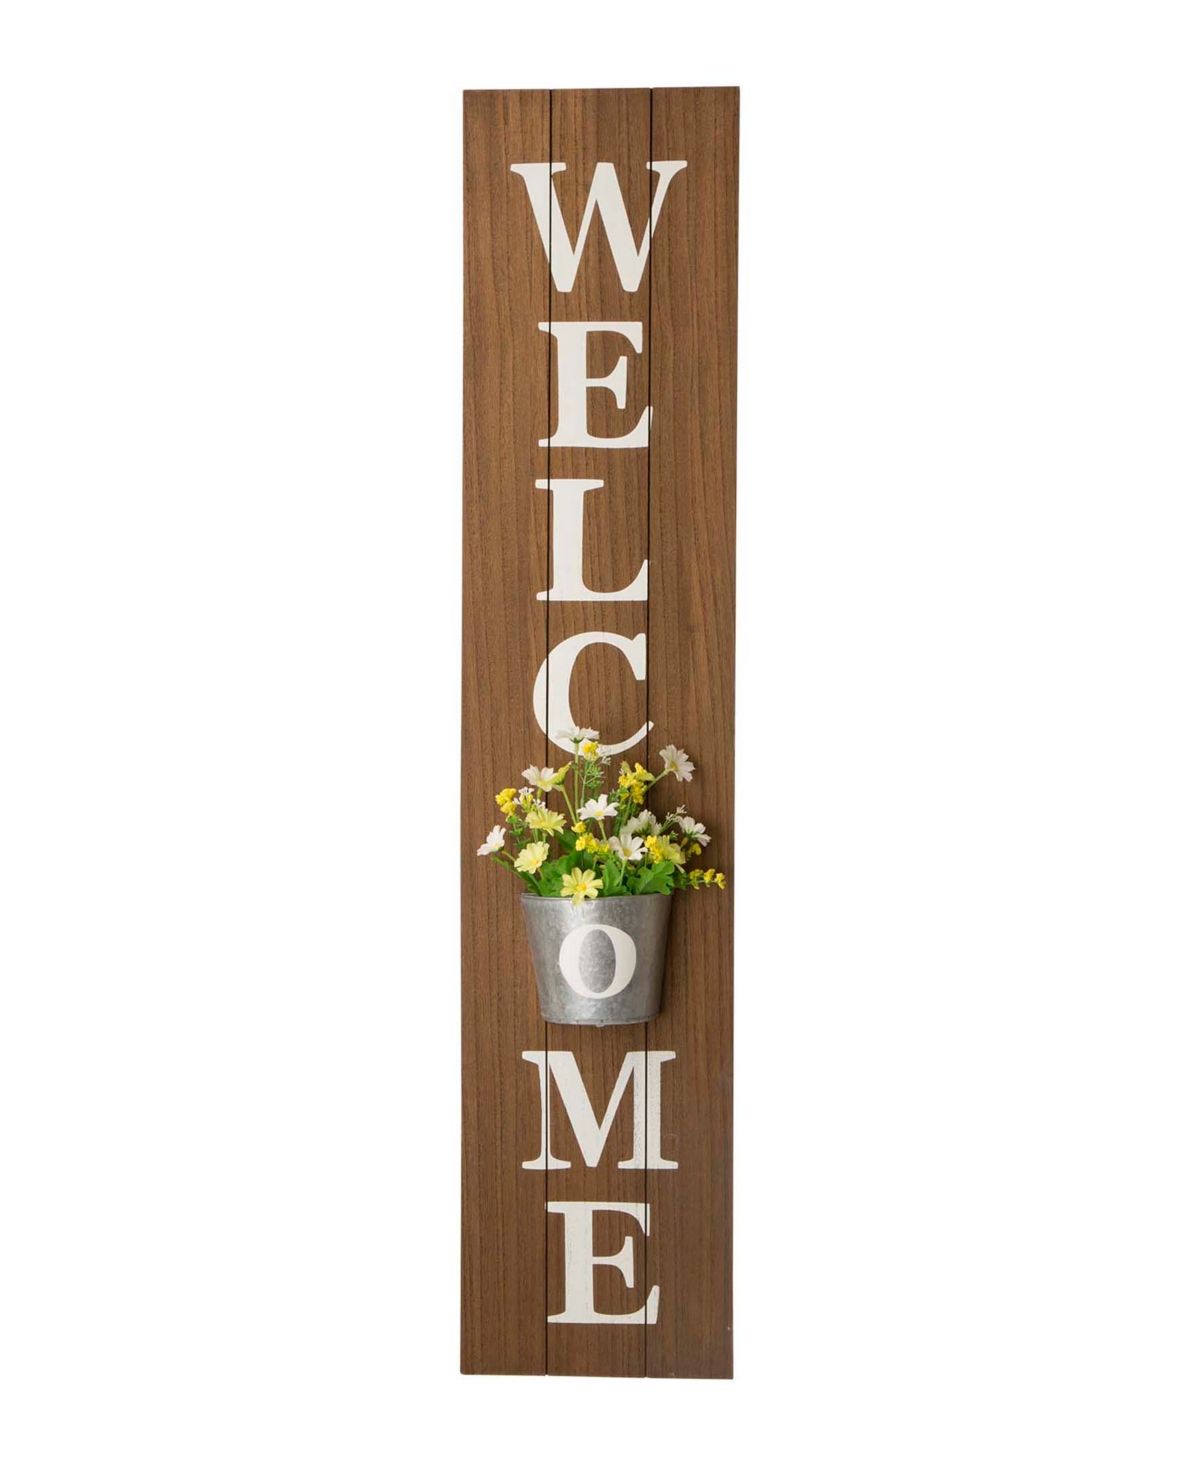 Glitzhome 42" H Wooden Welcome Porch Sign with Metal Planter | Macys (US)